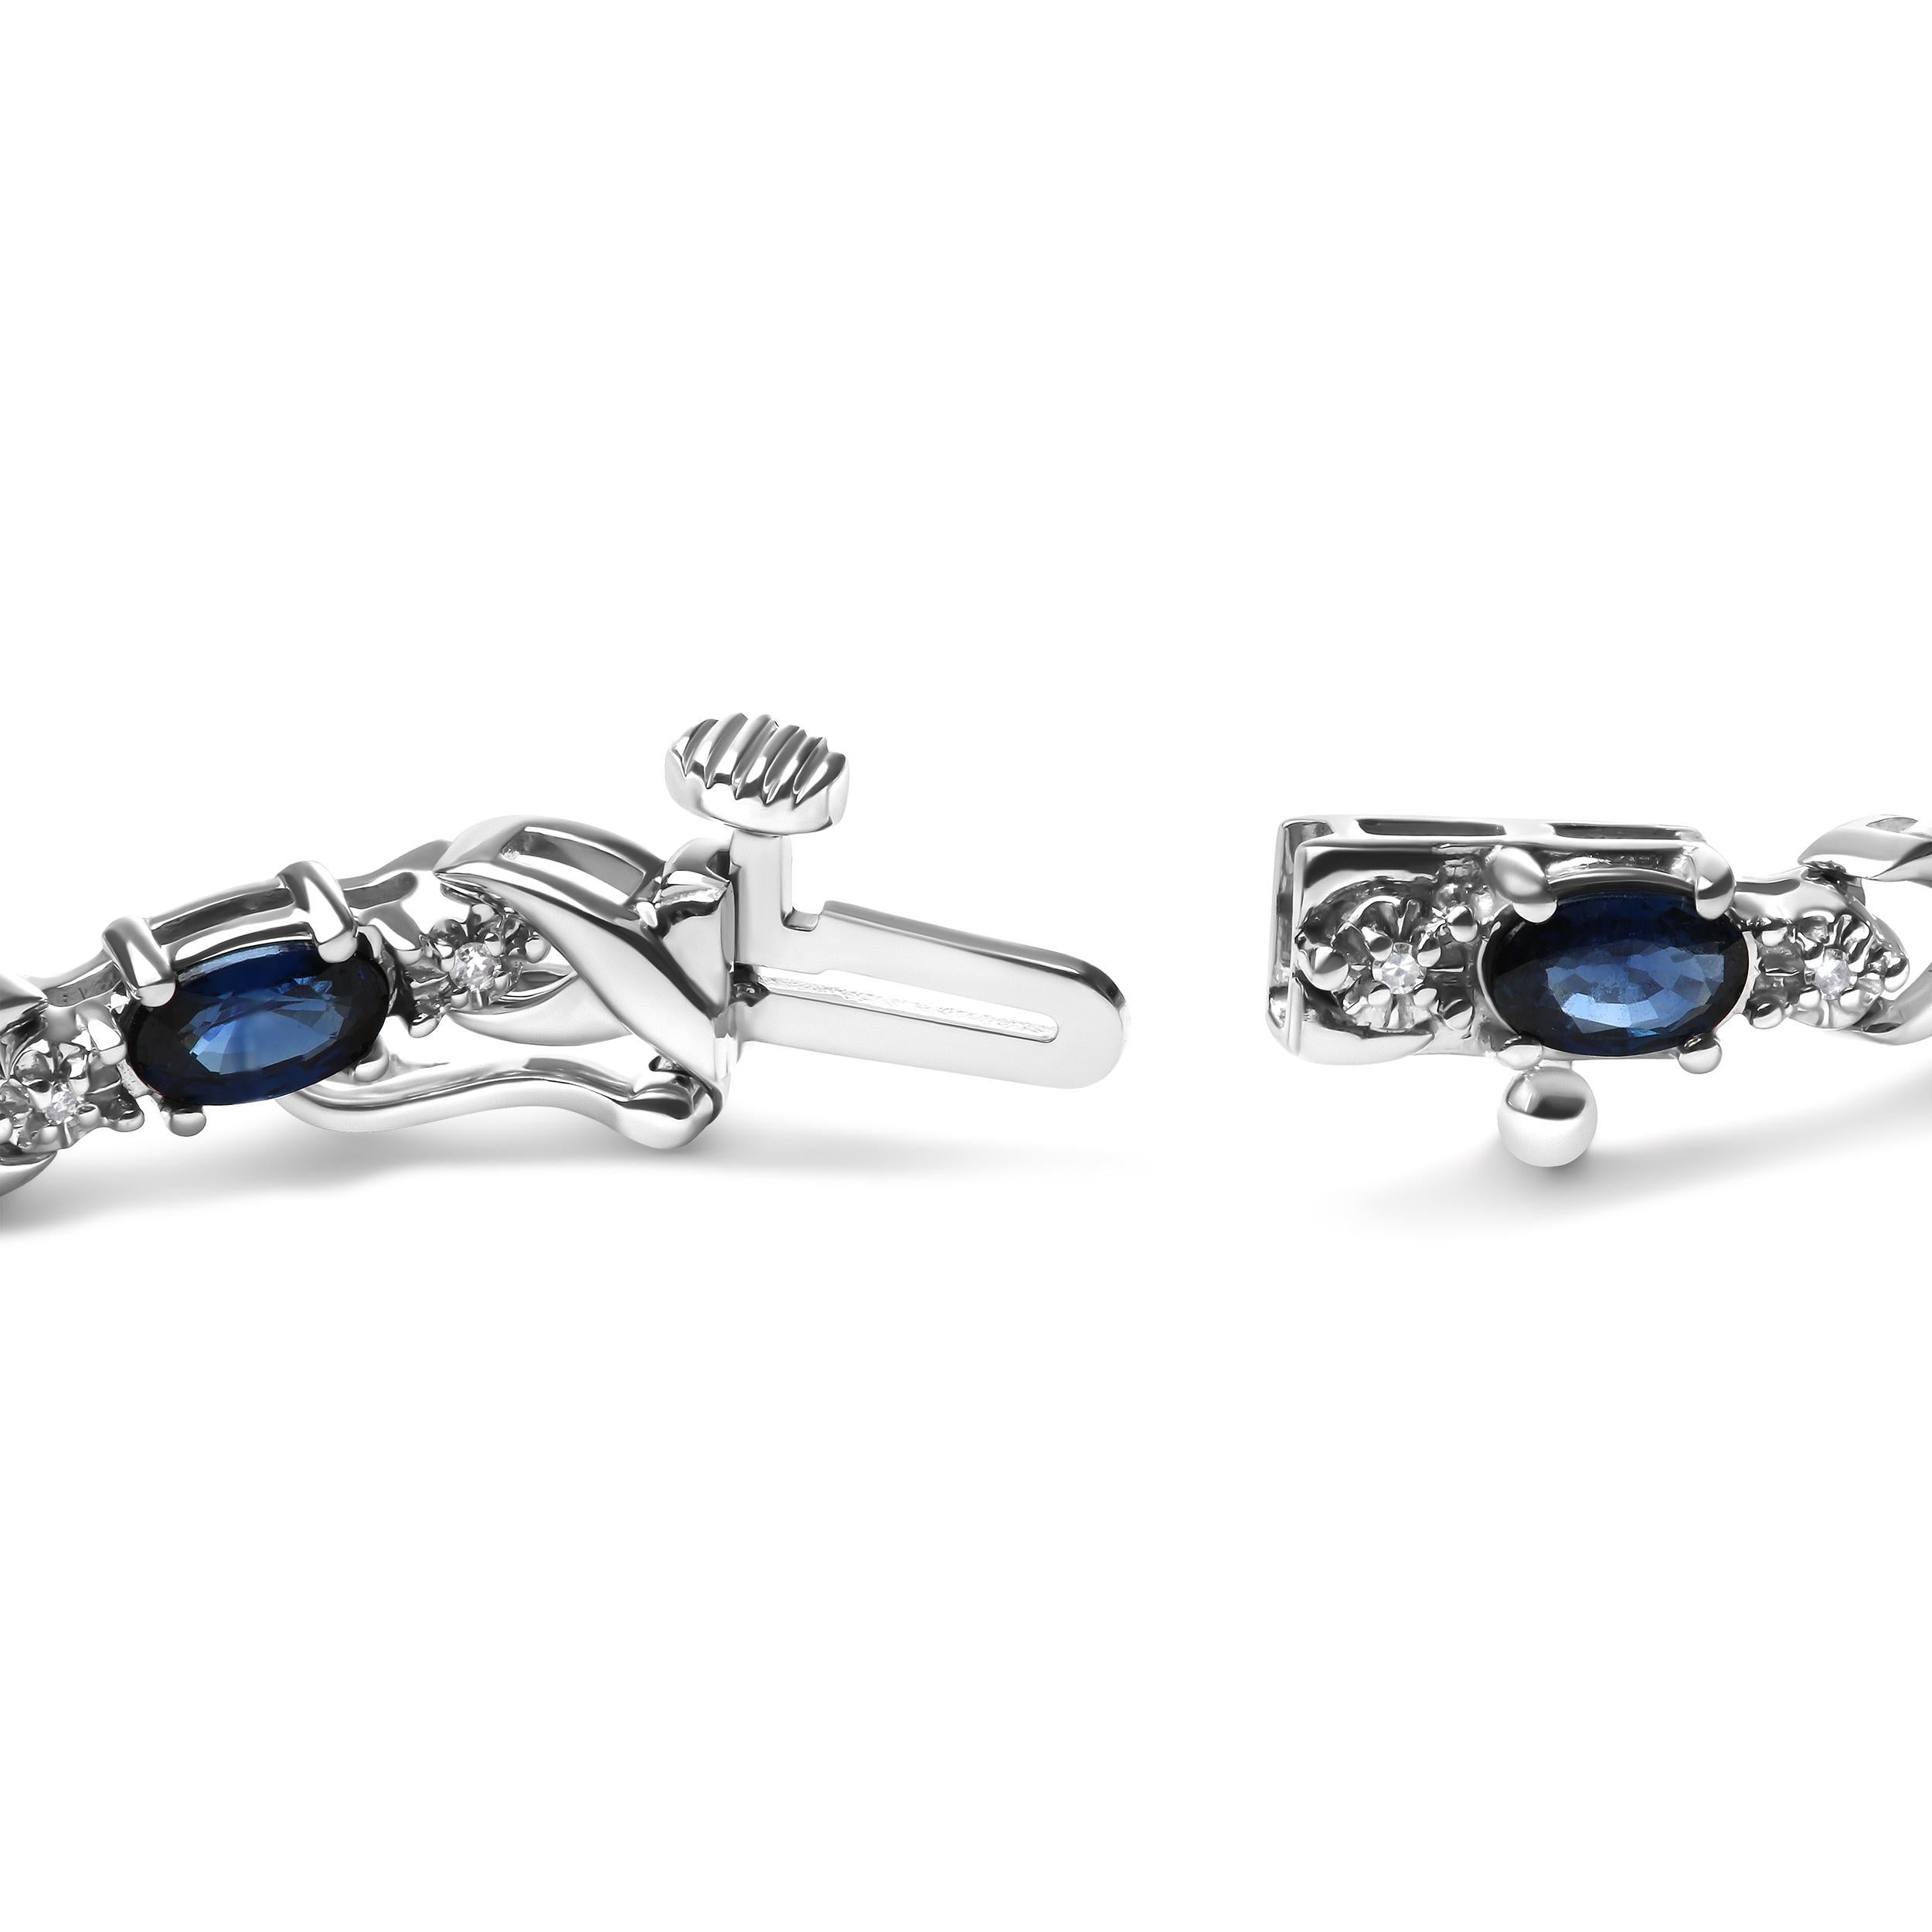 Indulge in the captivating allure of our exquisite bracelet, perfect for the elegant and sophisticated woman. A natural heat-treated blue sapphire, with a stunning oval shape and measuring 5 x 4mm, is prong set amidst 22 natural round diamonds